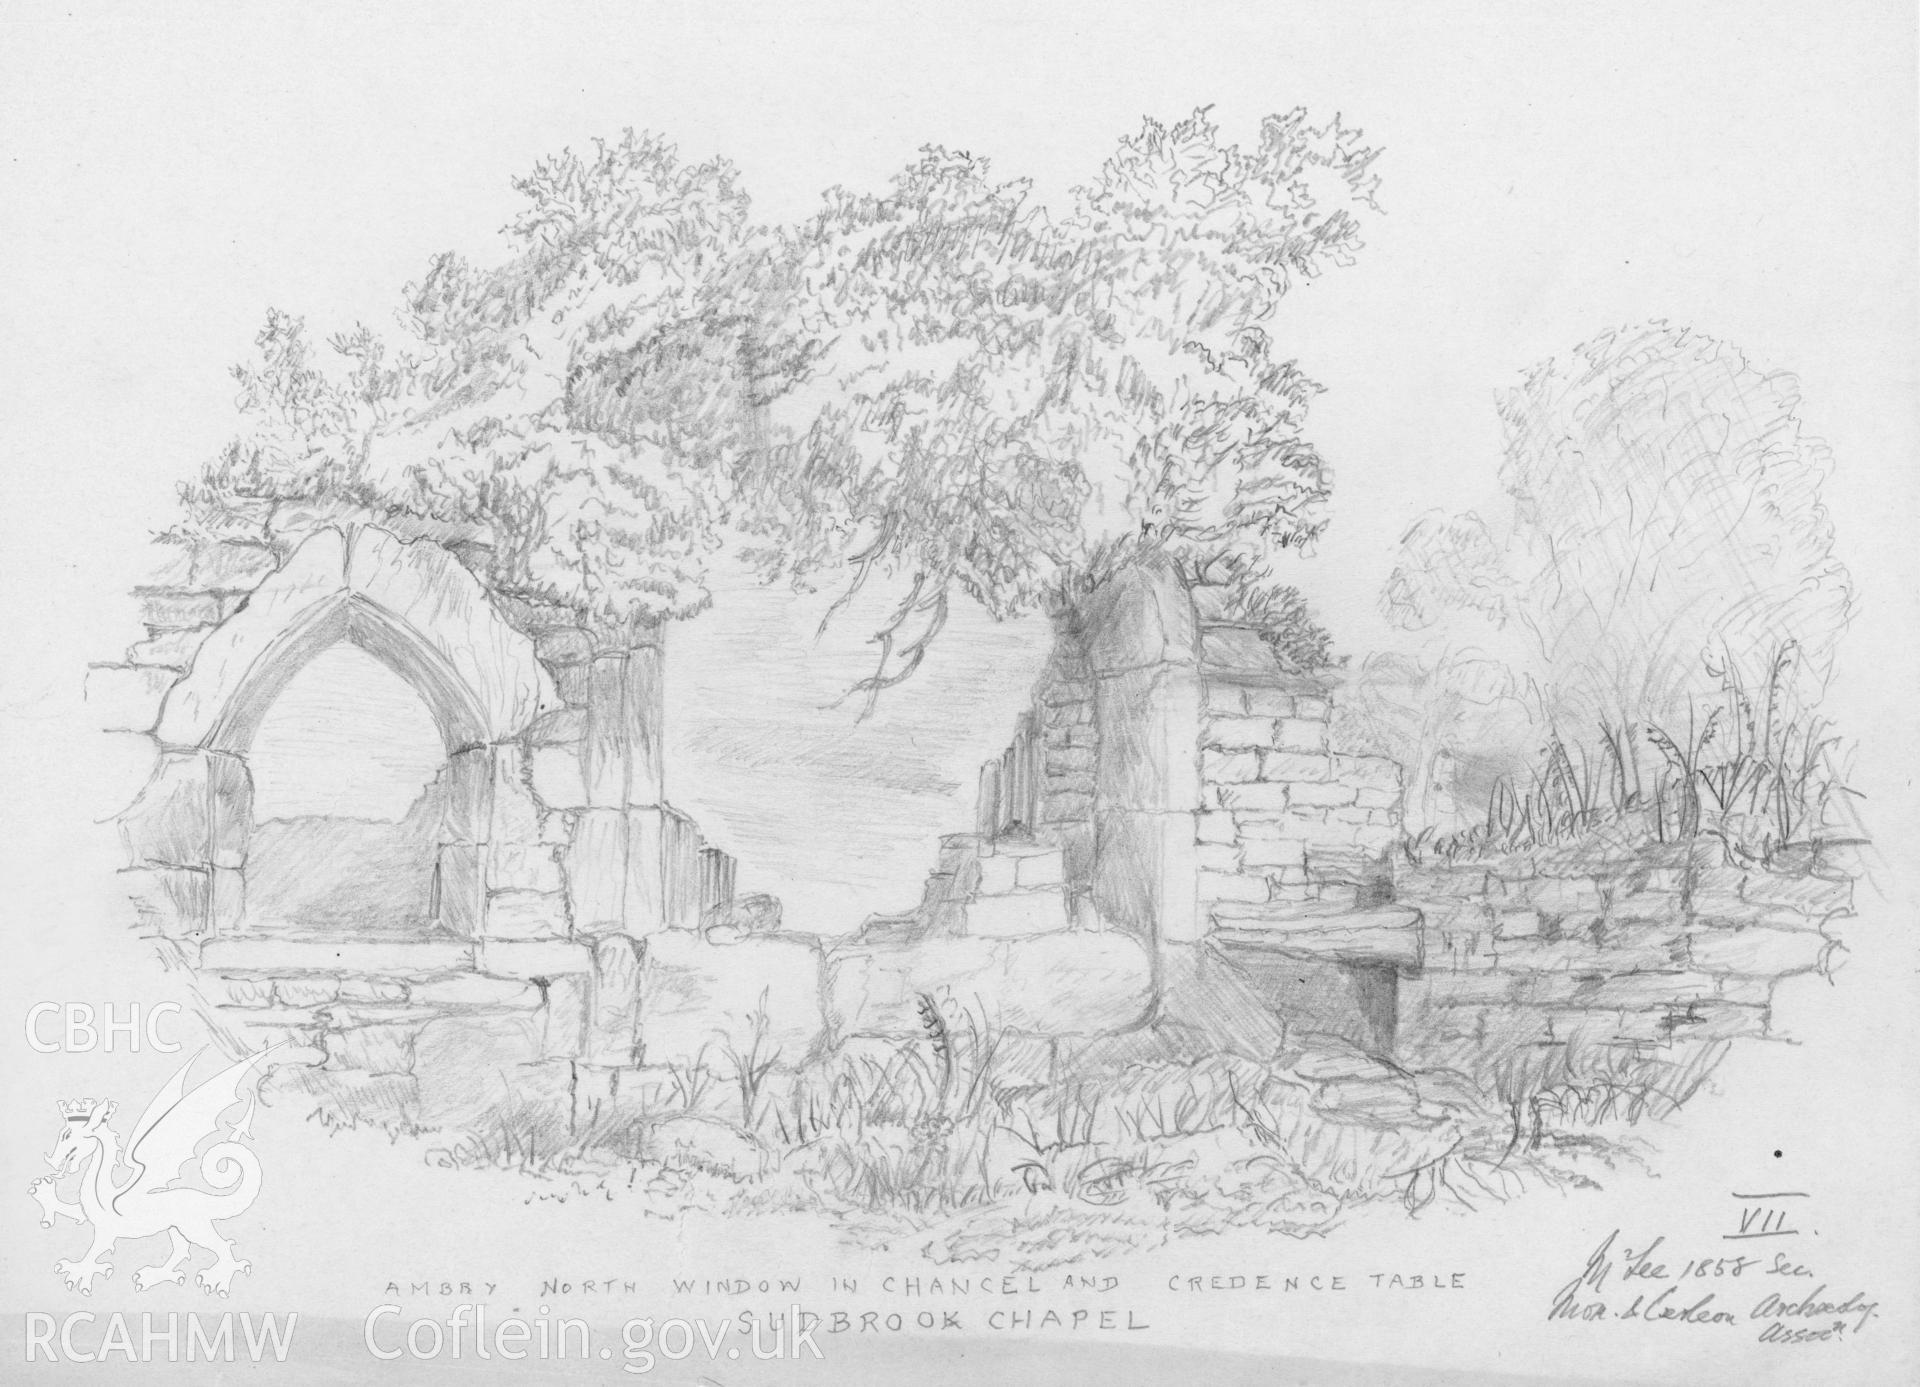 Drawing from the Revd. C.H.A. Porter Collection.  Drawing of Sudbrook Chapel, illustrating the ambry, north window in chancel and credence table, after original by McLee (1858).